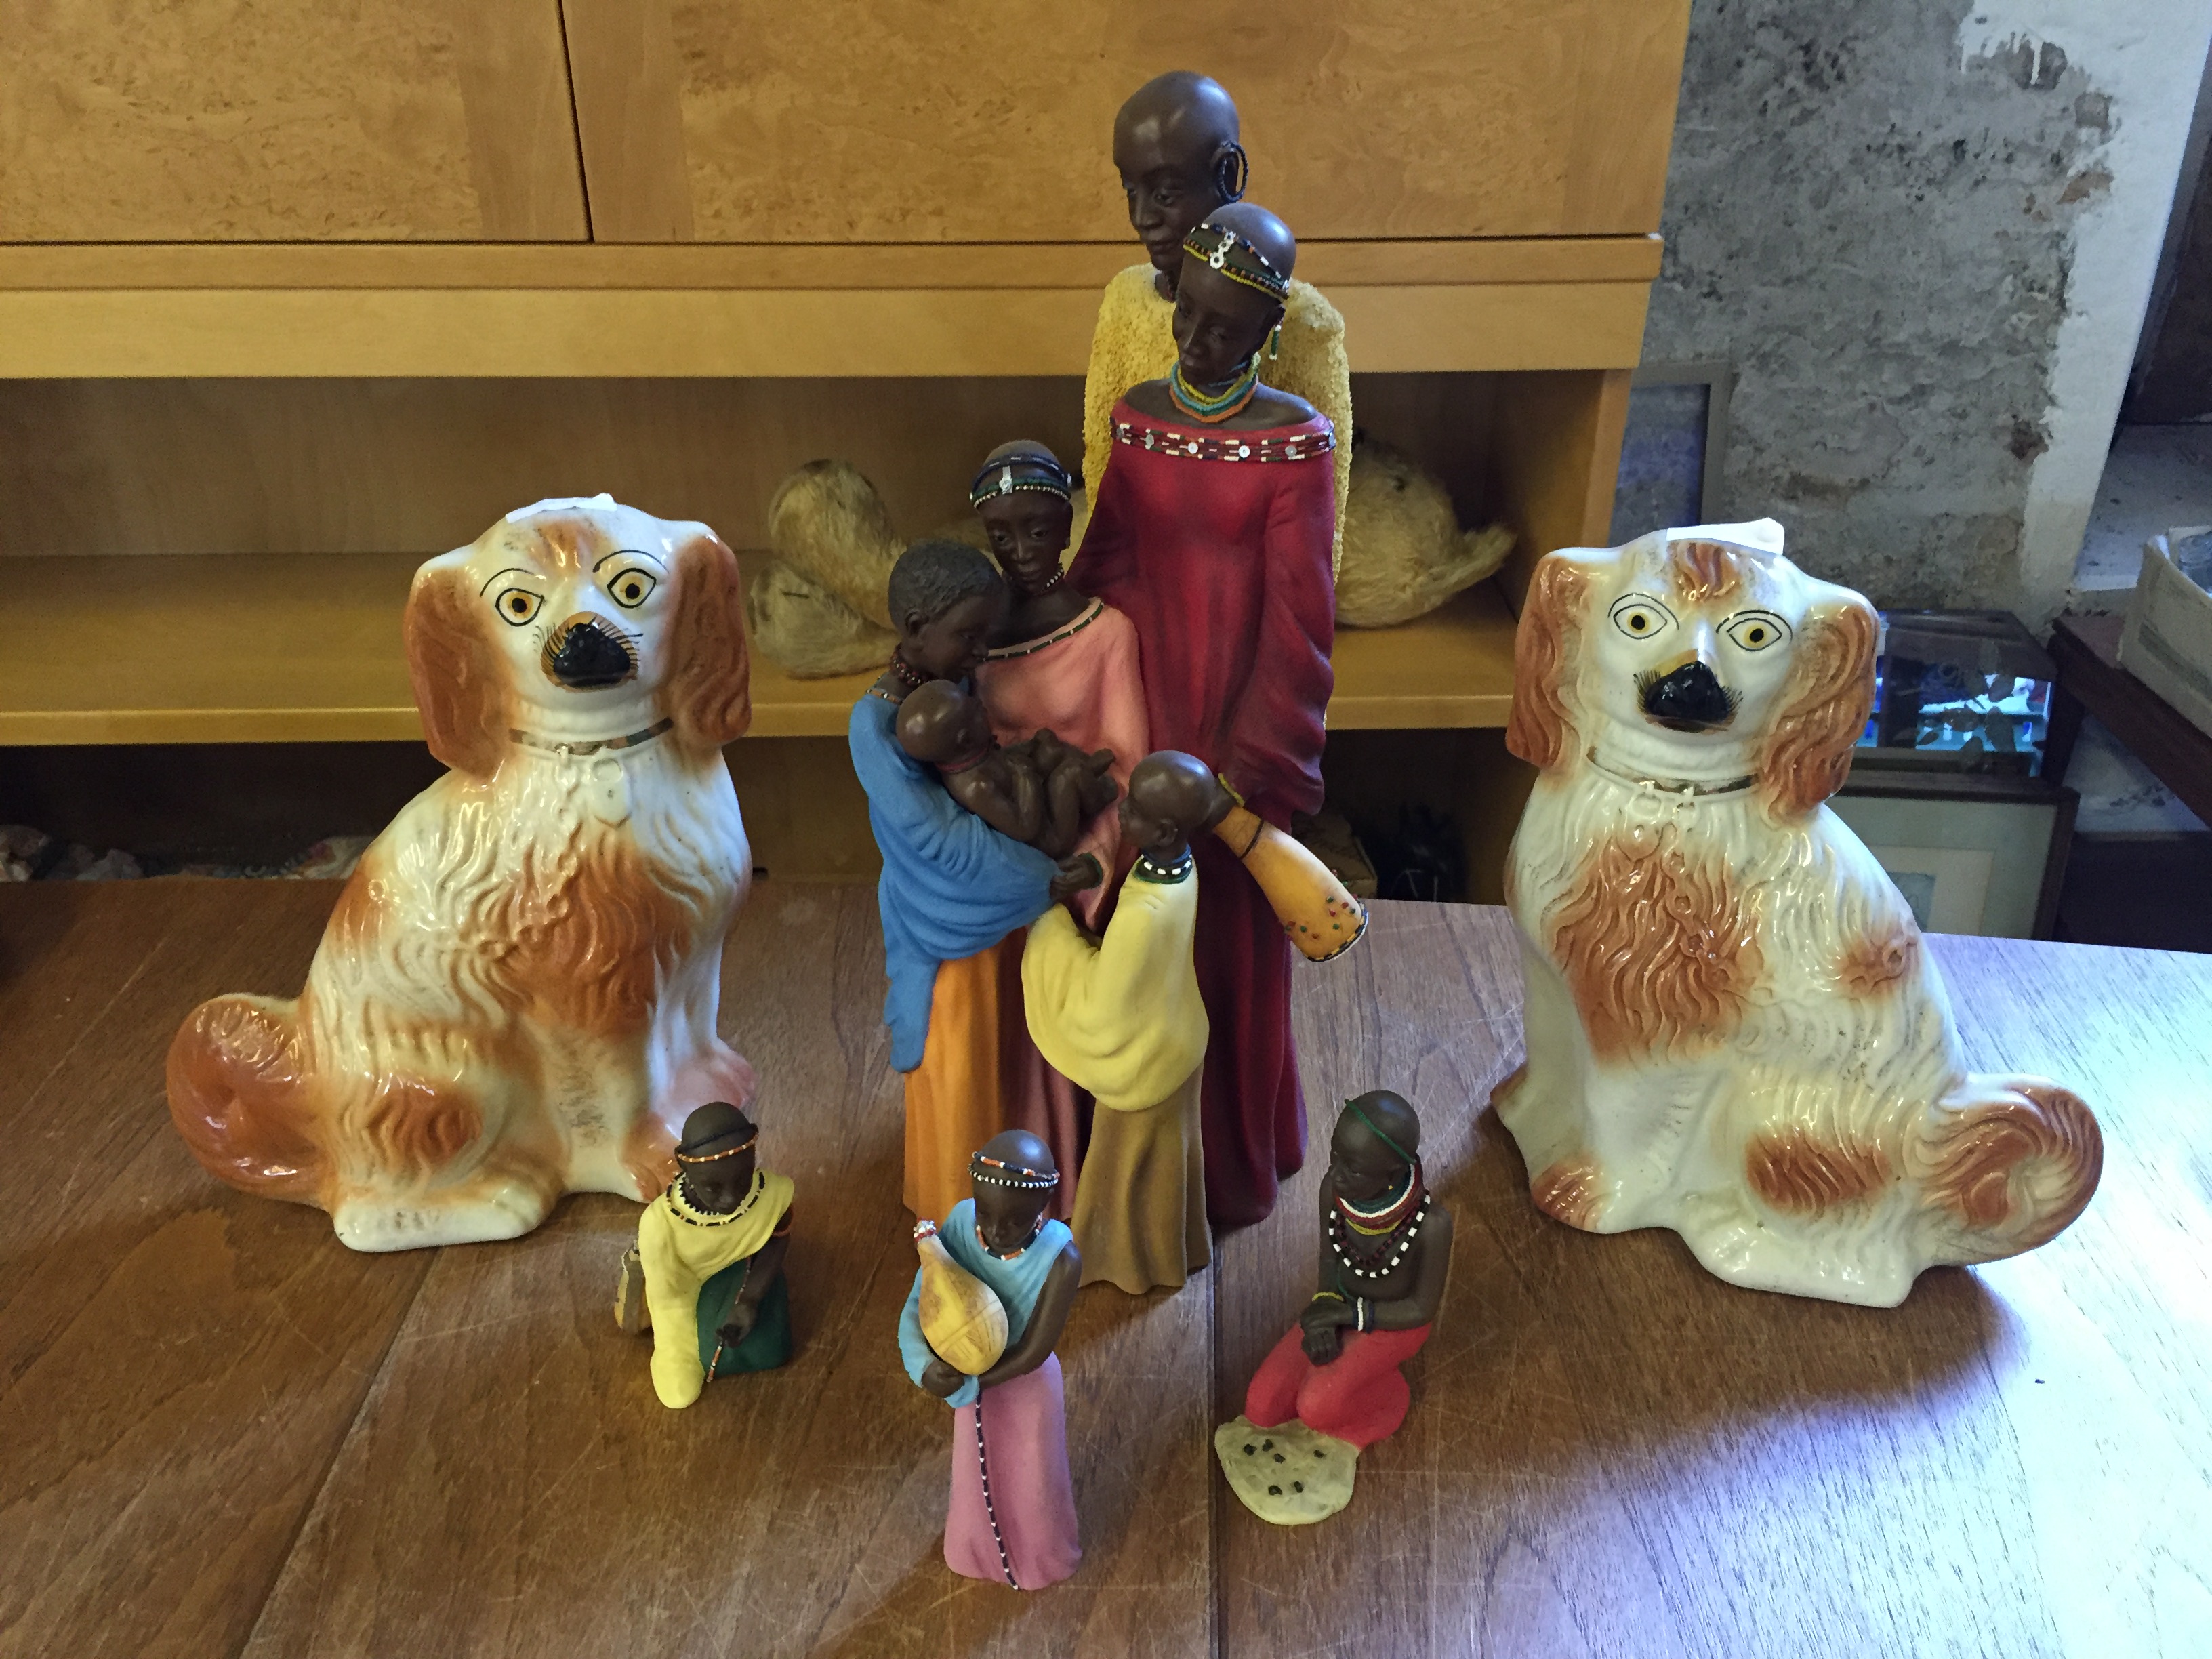 Modern African figures and two wally dogs.